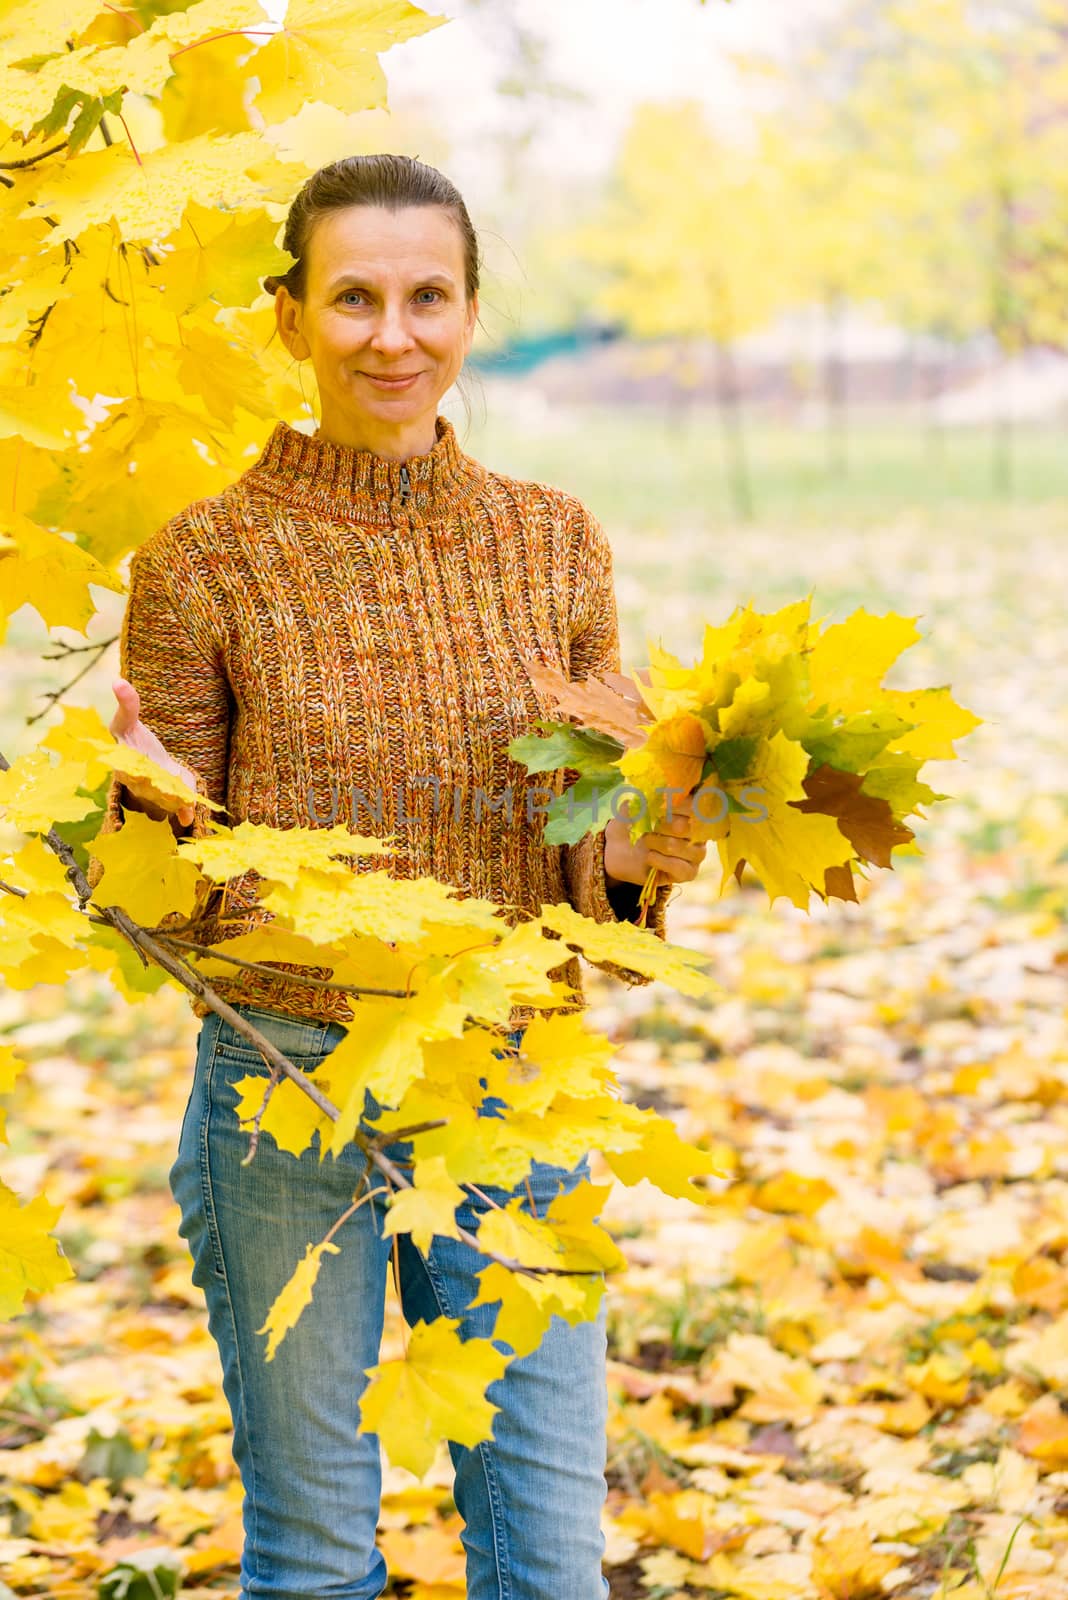 Woman Picking Leaves in Autumn by MaxalTamor